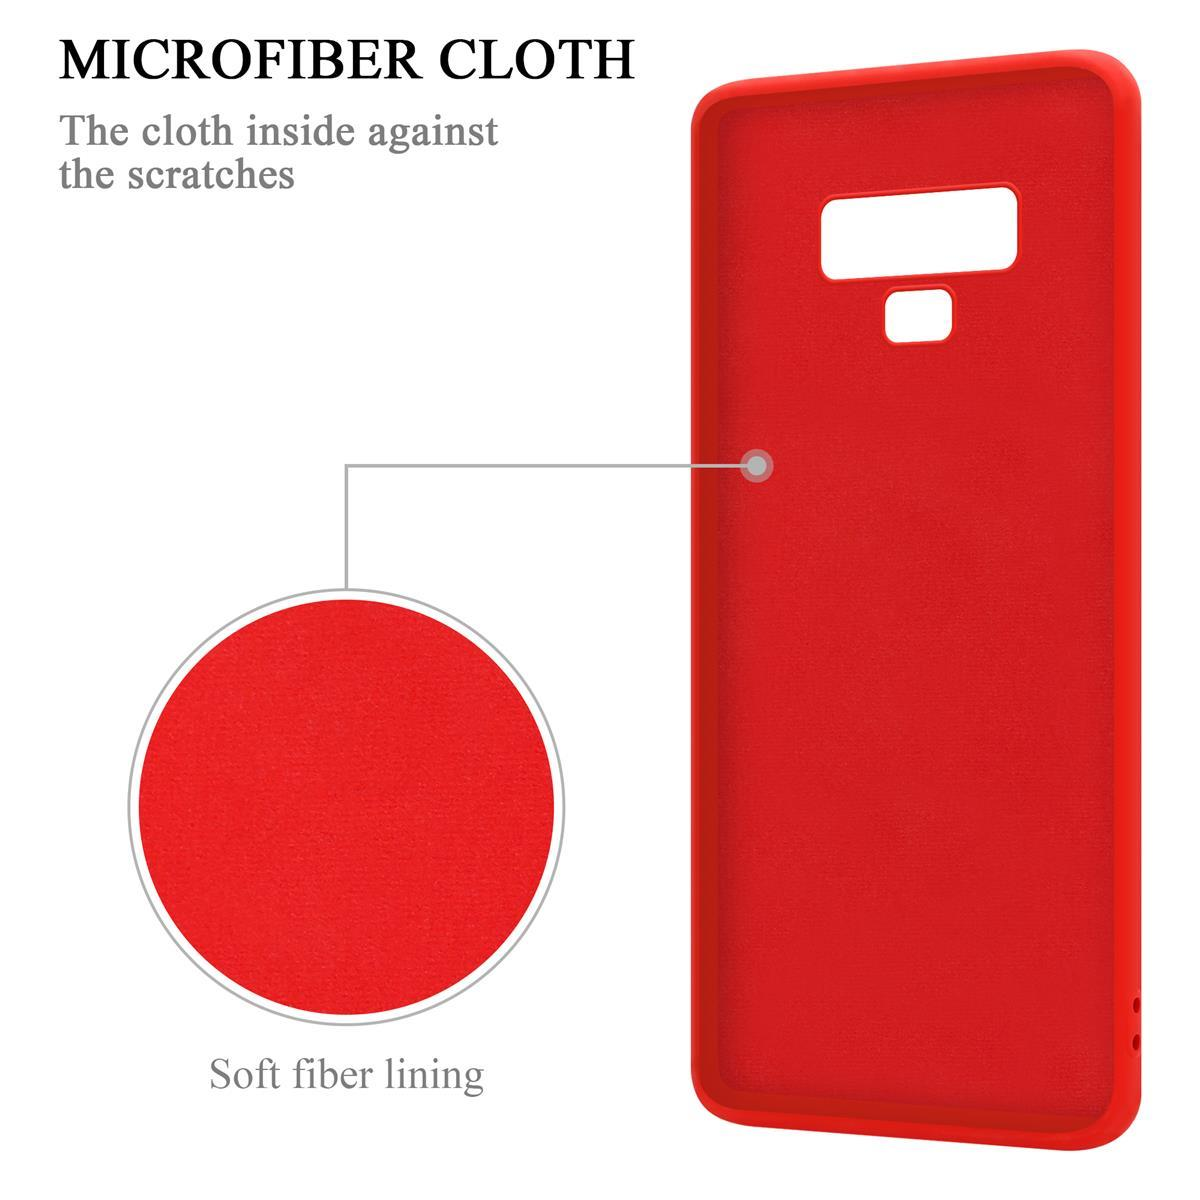 Backcover, Ring 9, Case NOTE Silicone im LIQUID Samsung, Style, Liquid Galaxy Hülle CADORABO ROT